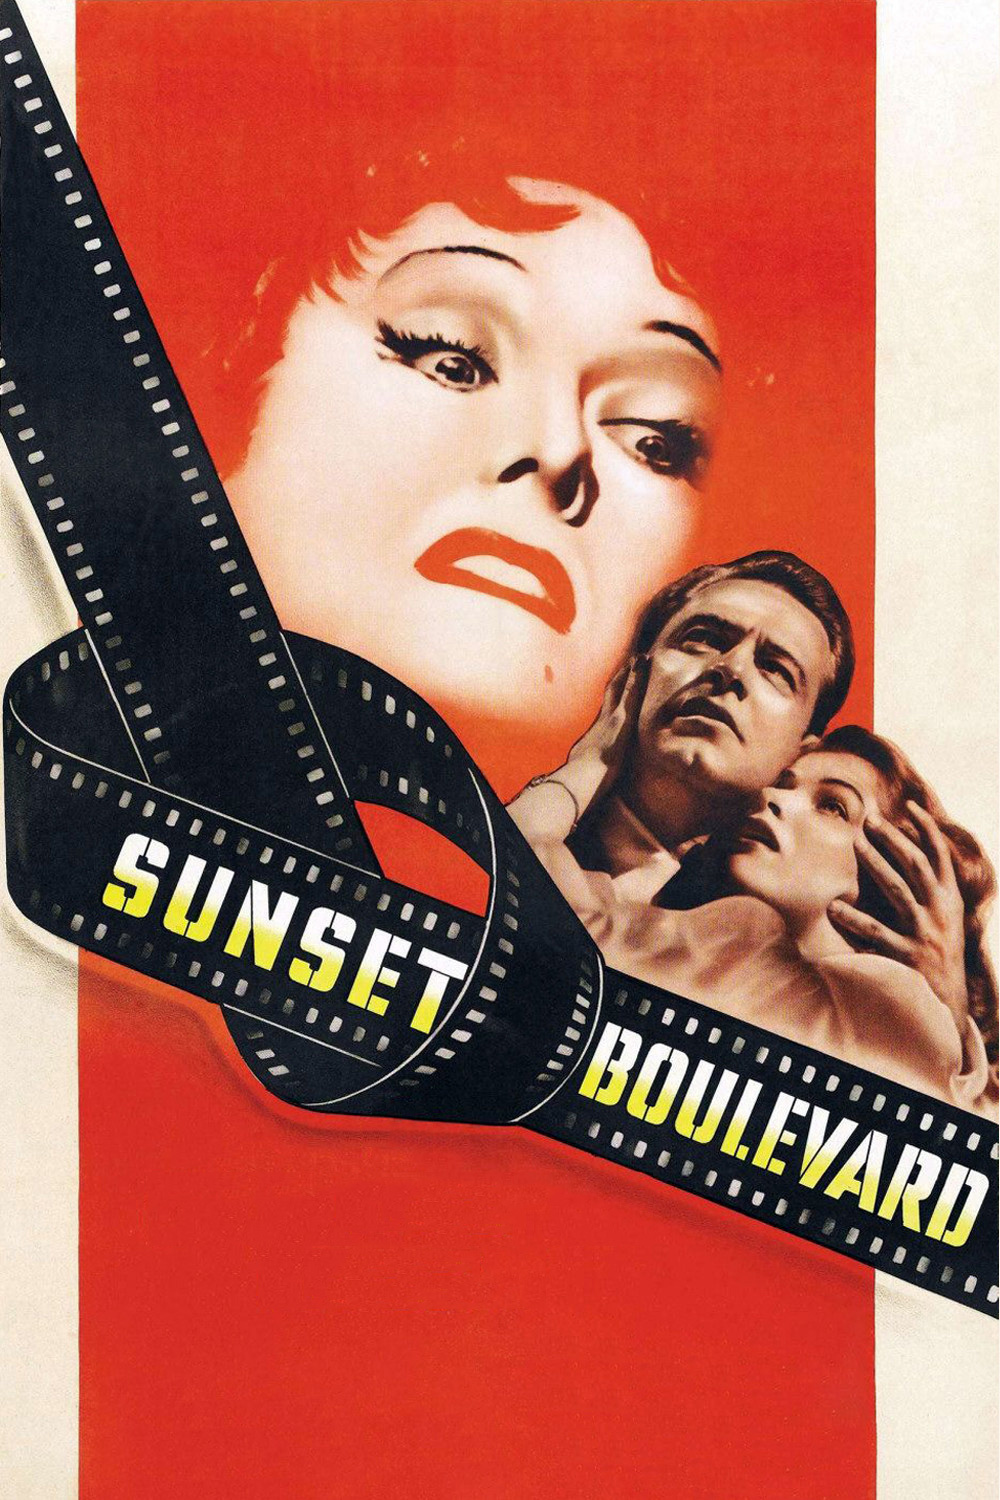 Poster for the movie "Sunset Boulevard"